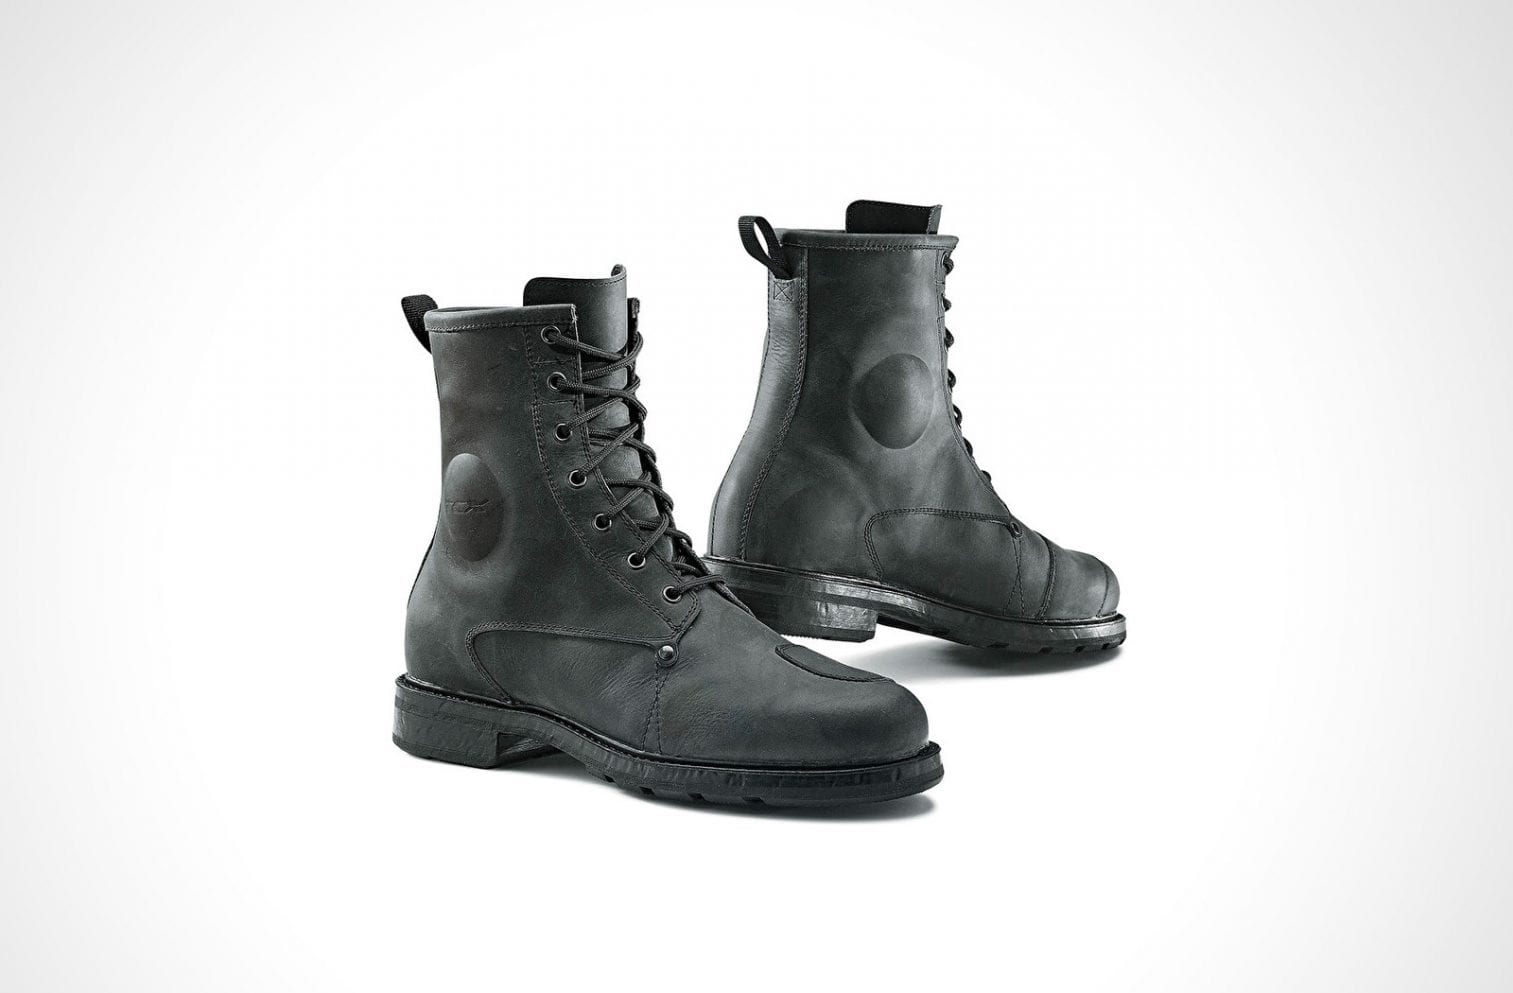 TCX X-Blend Waterproof Boots - Return of the Cafe Racers